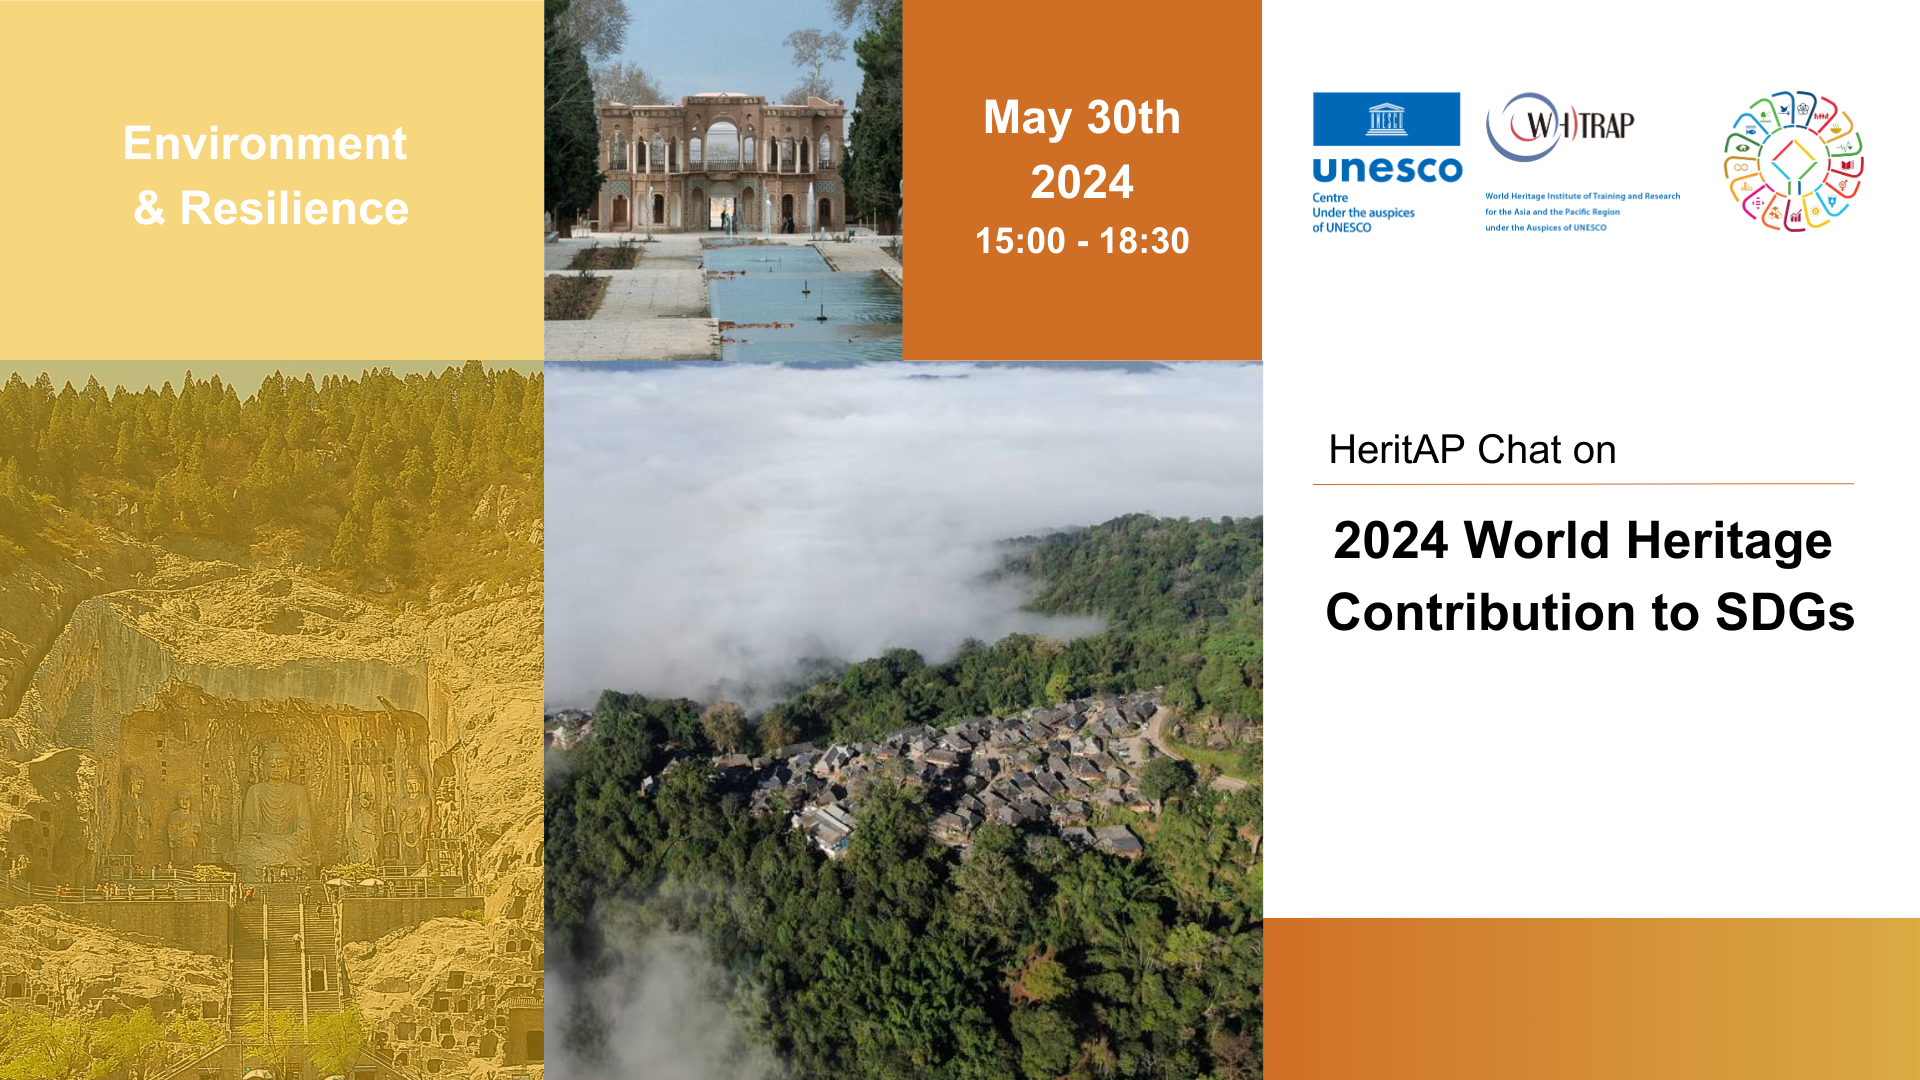 HeritAP Chat on 2024 World Heritage Contribution to SDGs